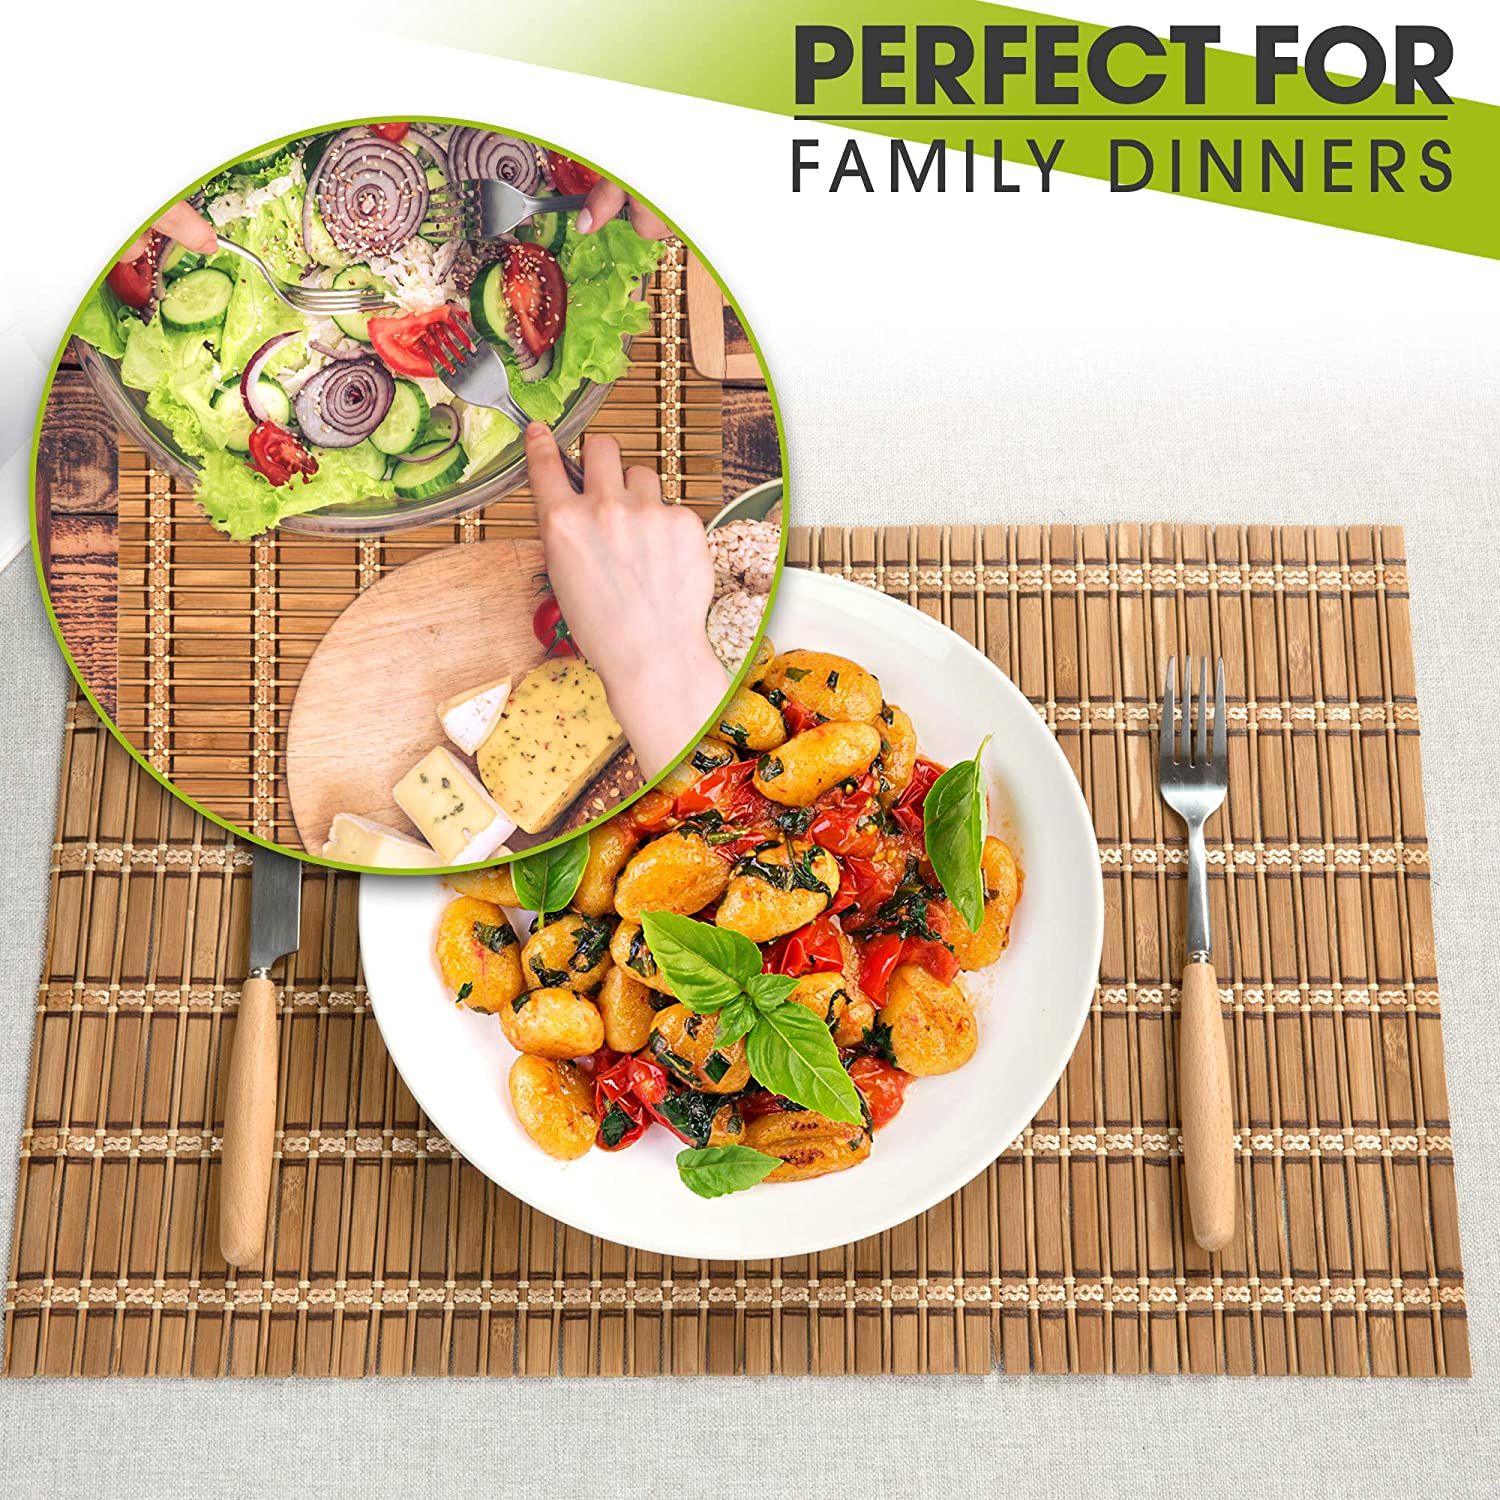 Home Essentials Tapas Serving Set - Square Bamboo Paddle Appetizer Tray  with 4 Porcelain Bowls - White Ramekin Set - Bed Bath & Beyond - 30397561